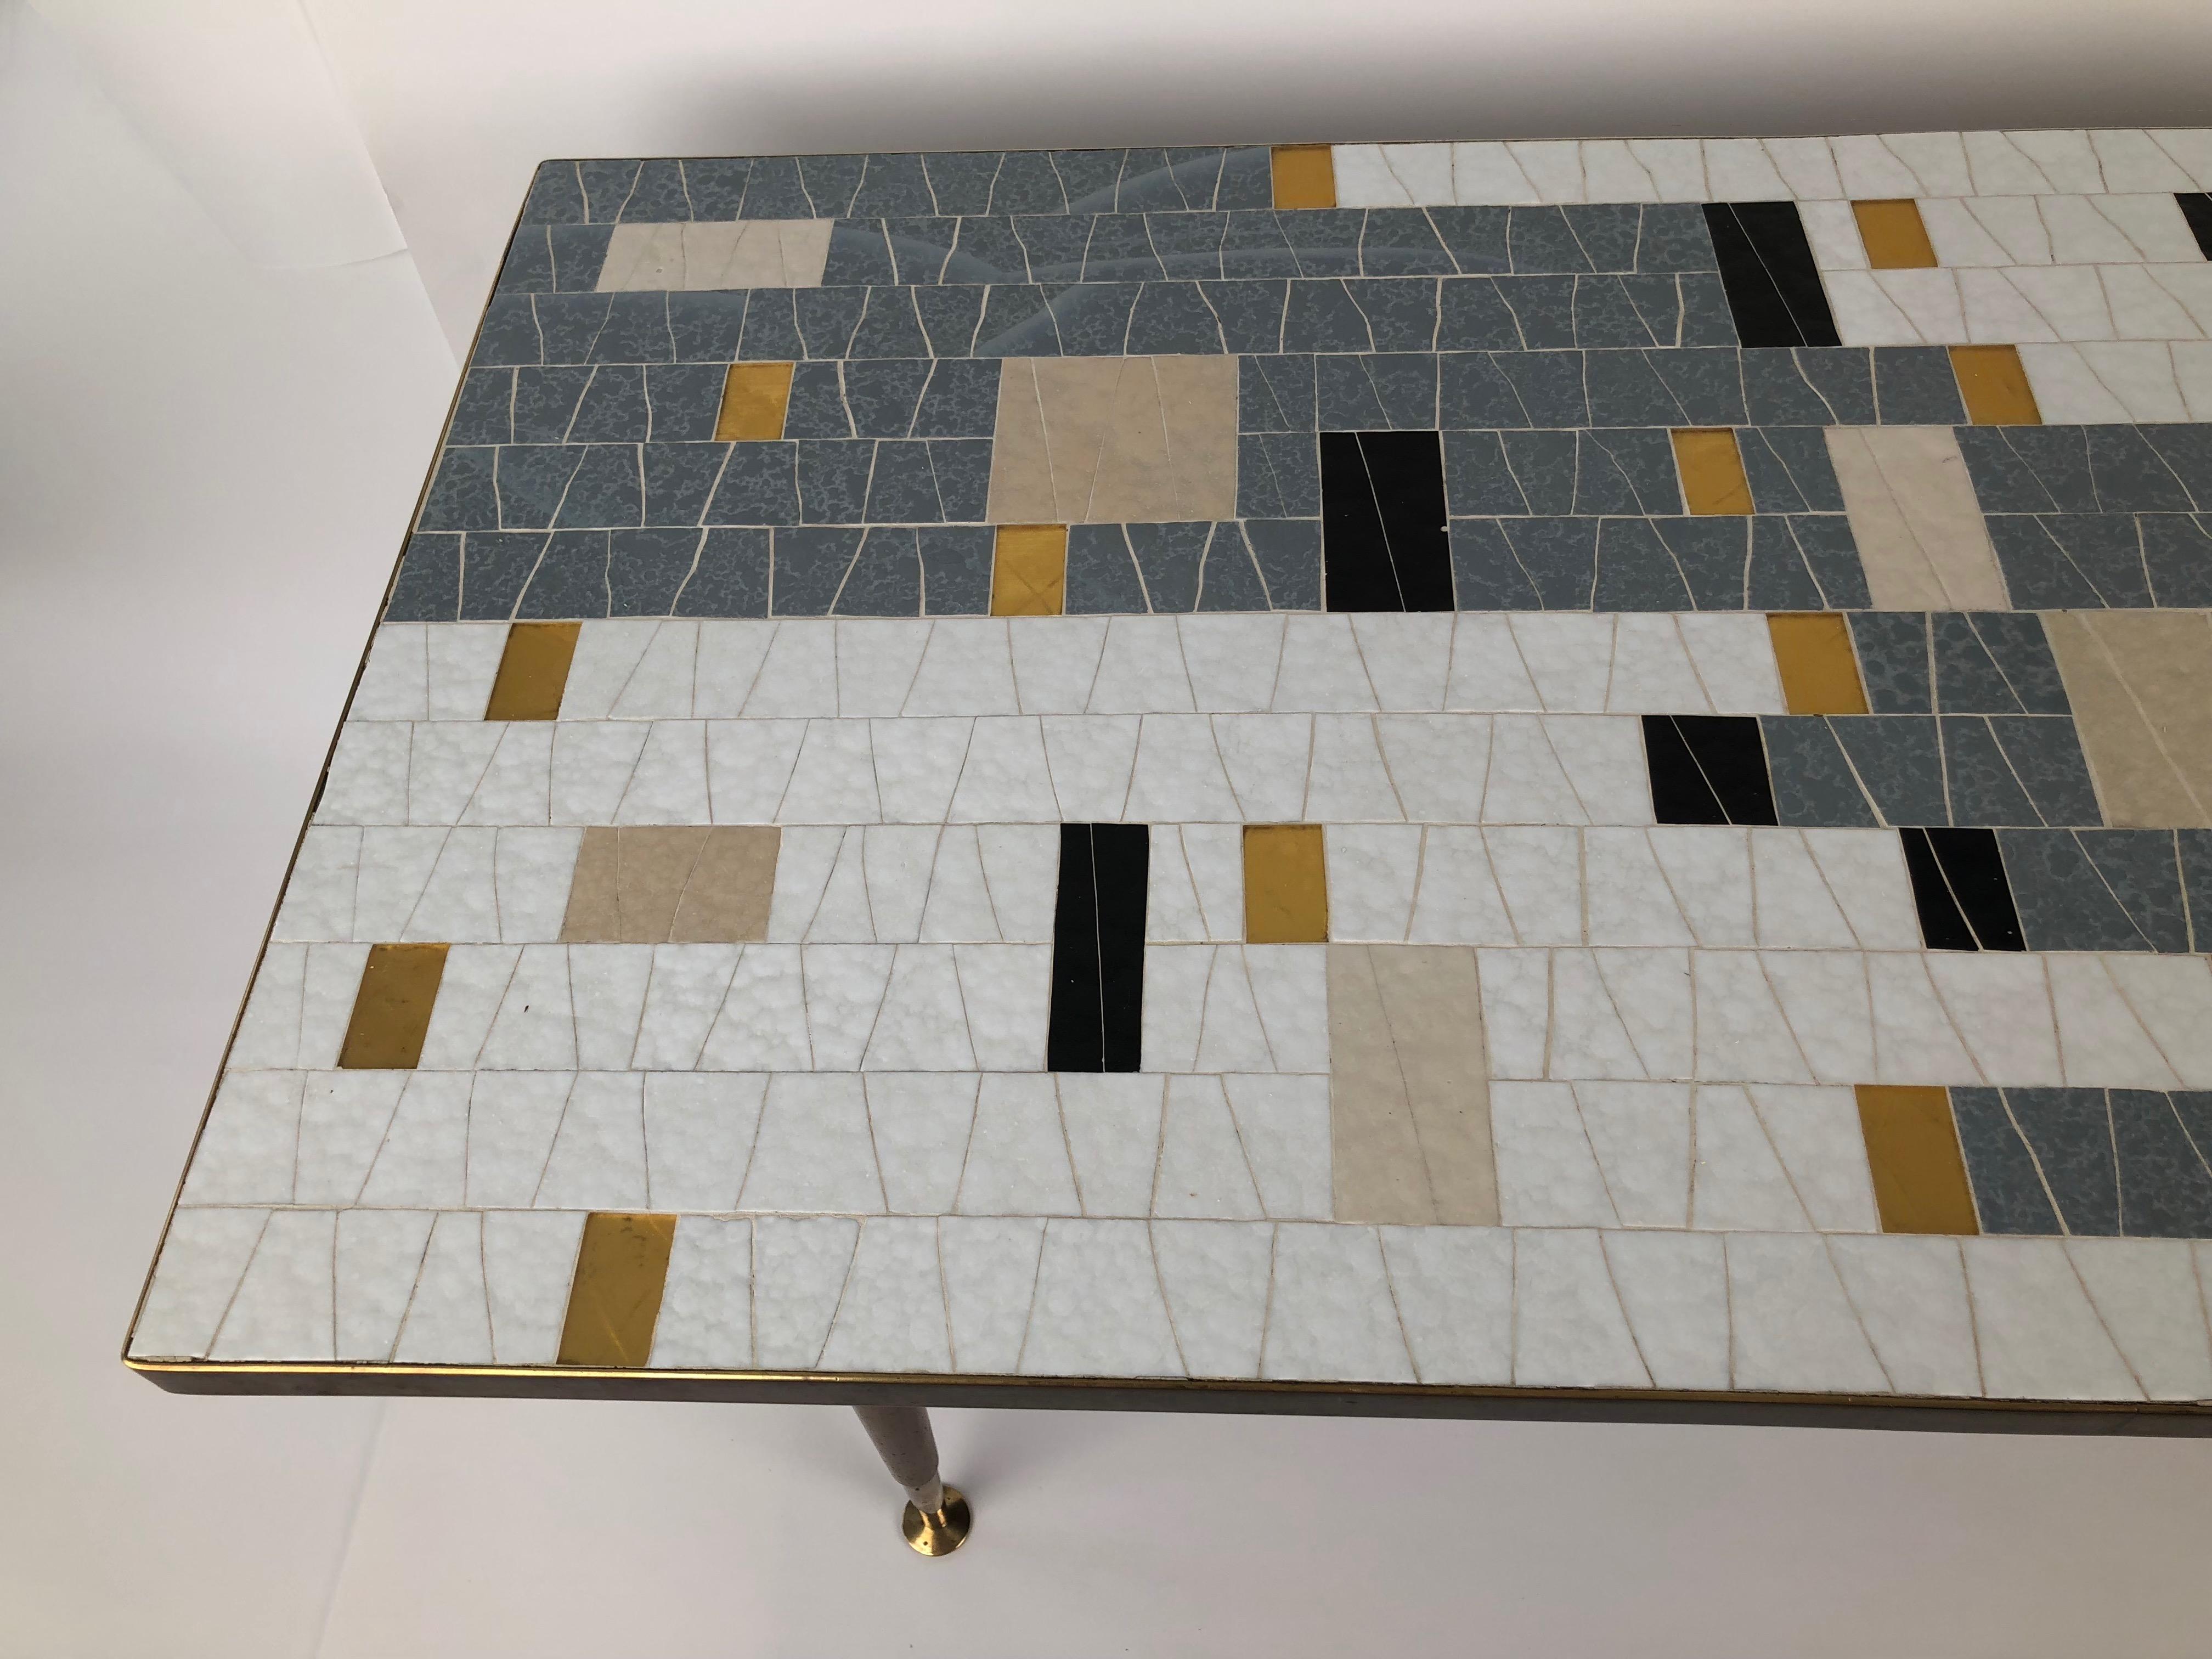 A beautiful Mid-centry glass mosaic coffee table from Ilse Möbel, Denmark. This remarkable glass mosaic is in beautiful condition.
The play between solid and transparent colours heighten the abstract pattern making it a work of art.
Hand crafted,